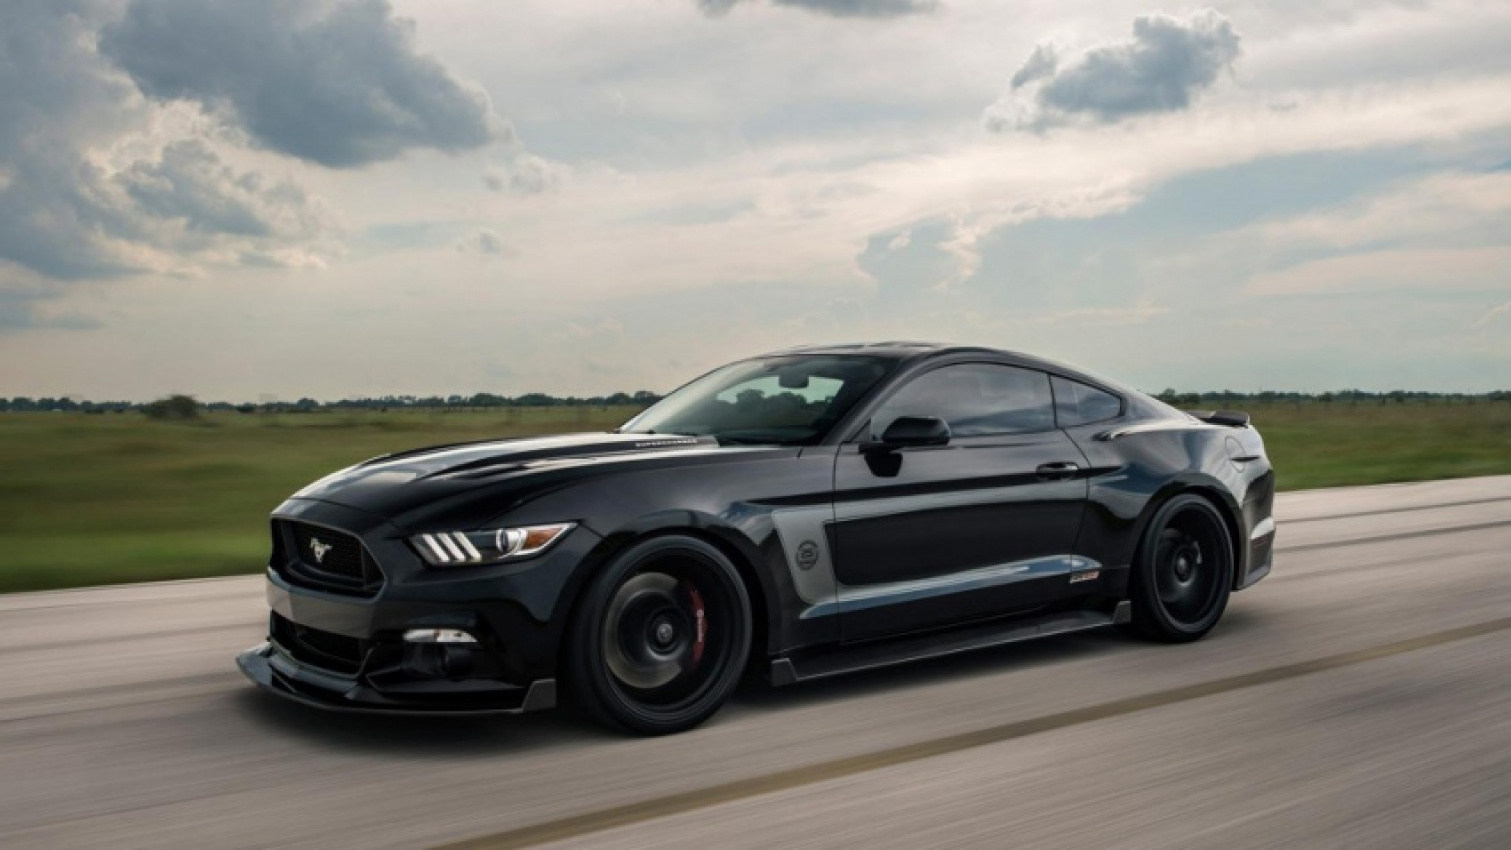 autos, cars, ford, hennessey, hp, autos hennessey, ford mustang, hennessey beefs up ford mustang to 804bhp.